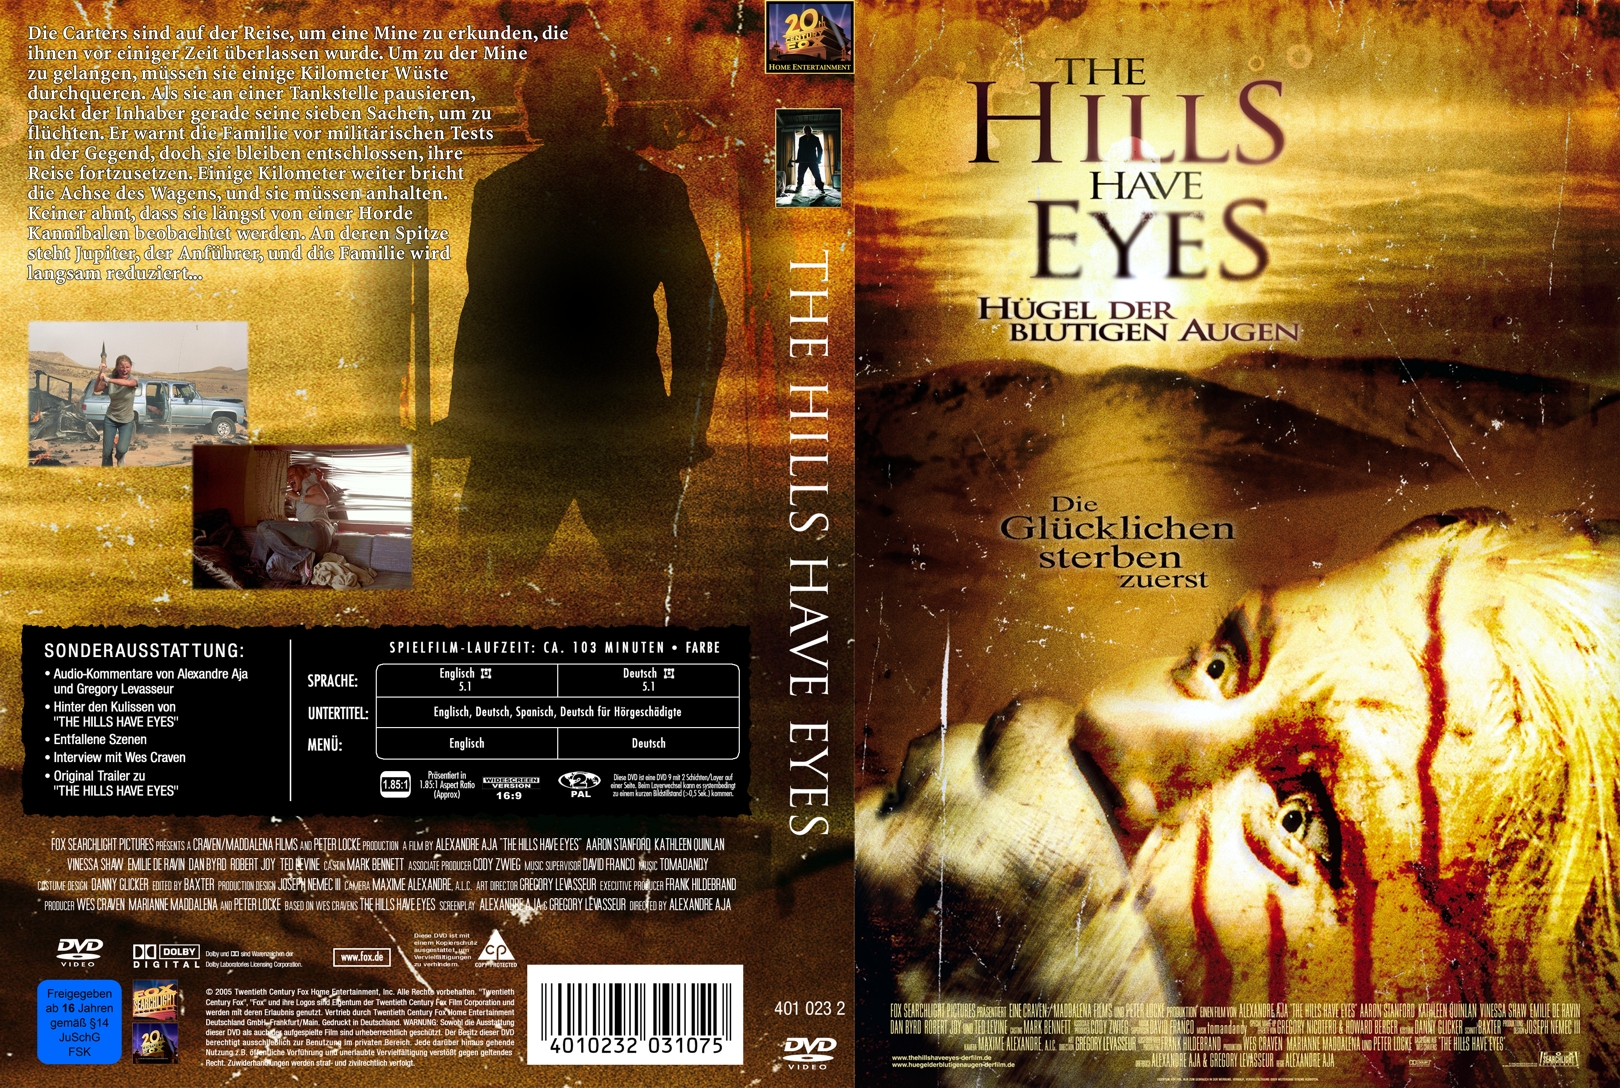 The Hills Have Eyes - front back.